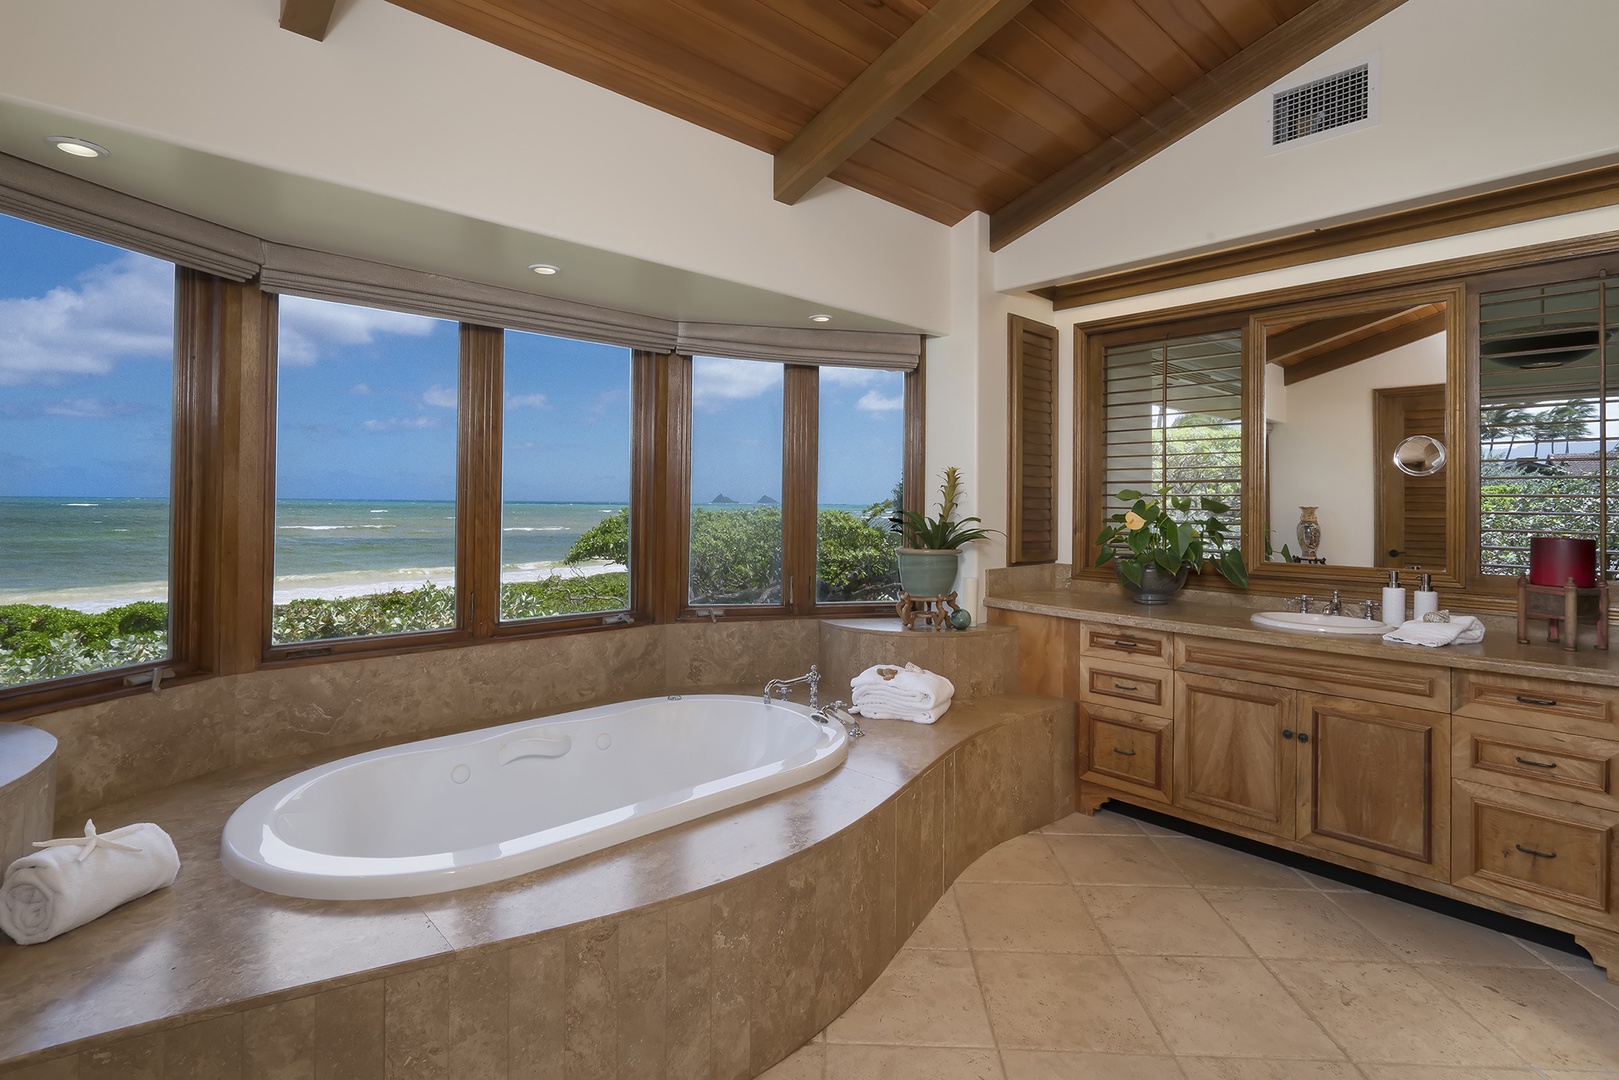 Kailua Vacation Rentals, Kailua's Kai Moena - Main house: Primary Bathroom with jetted tub and has walk in shower.